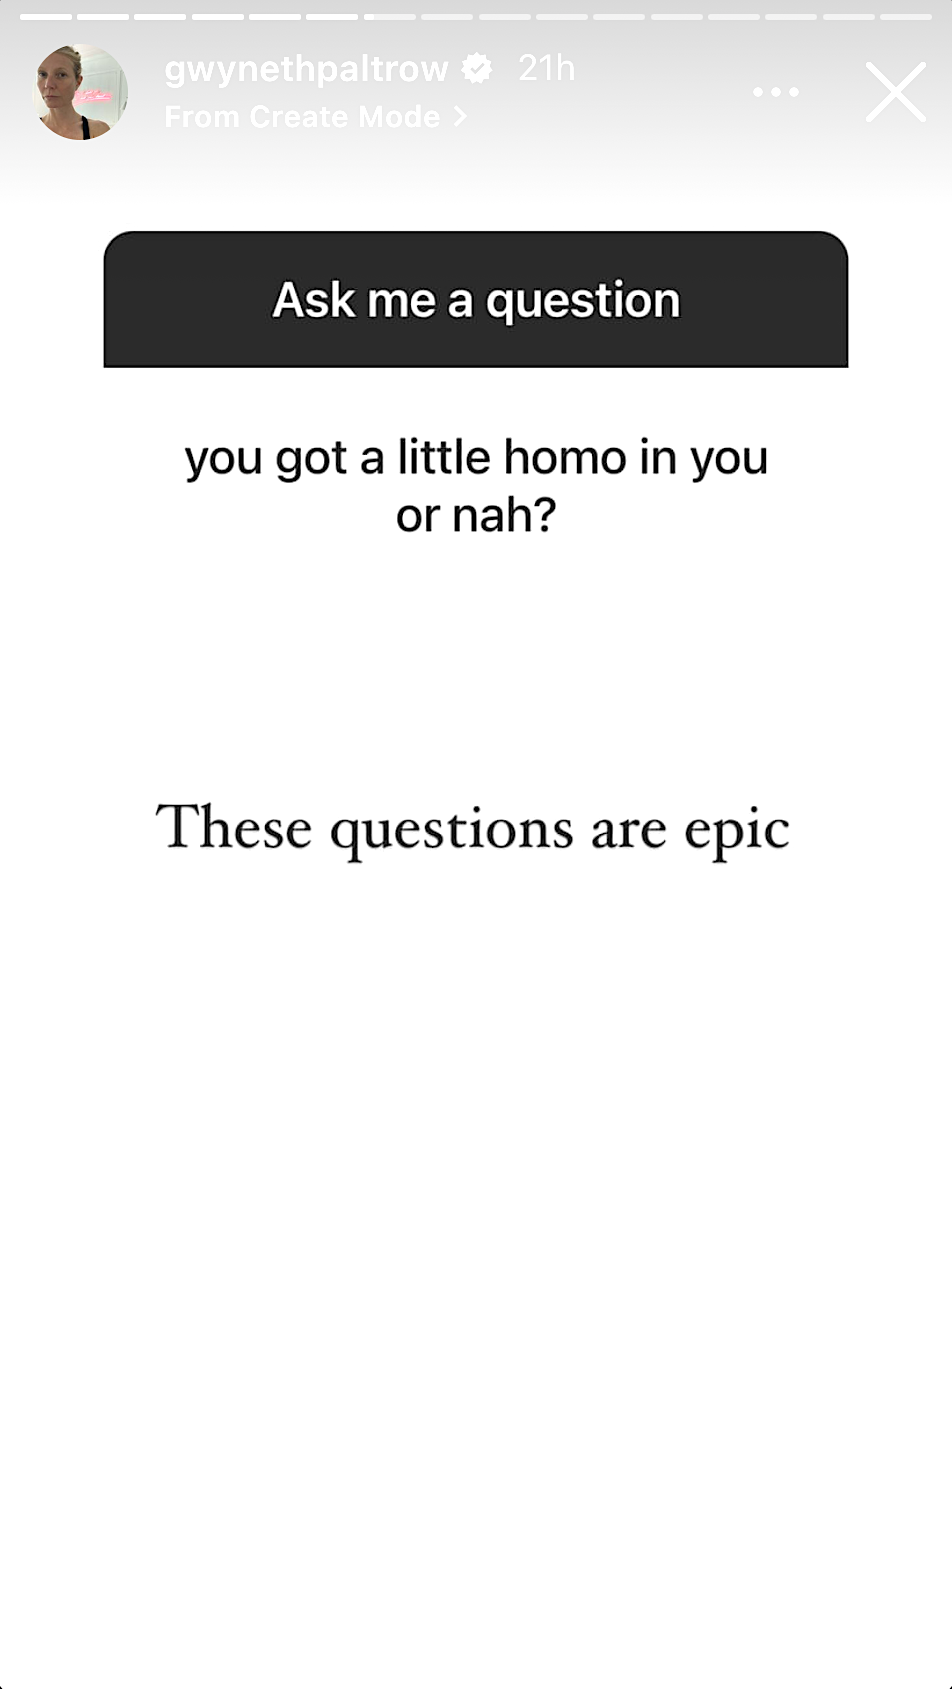 "These questions are epic"